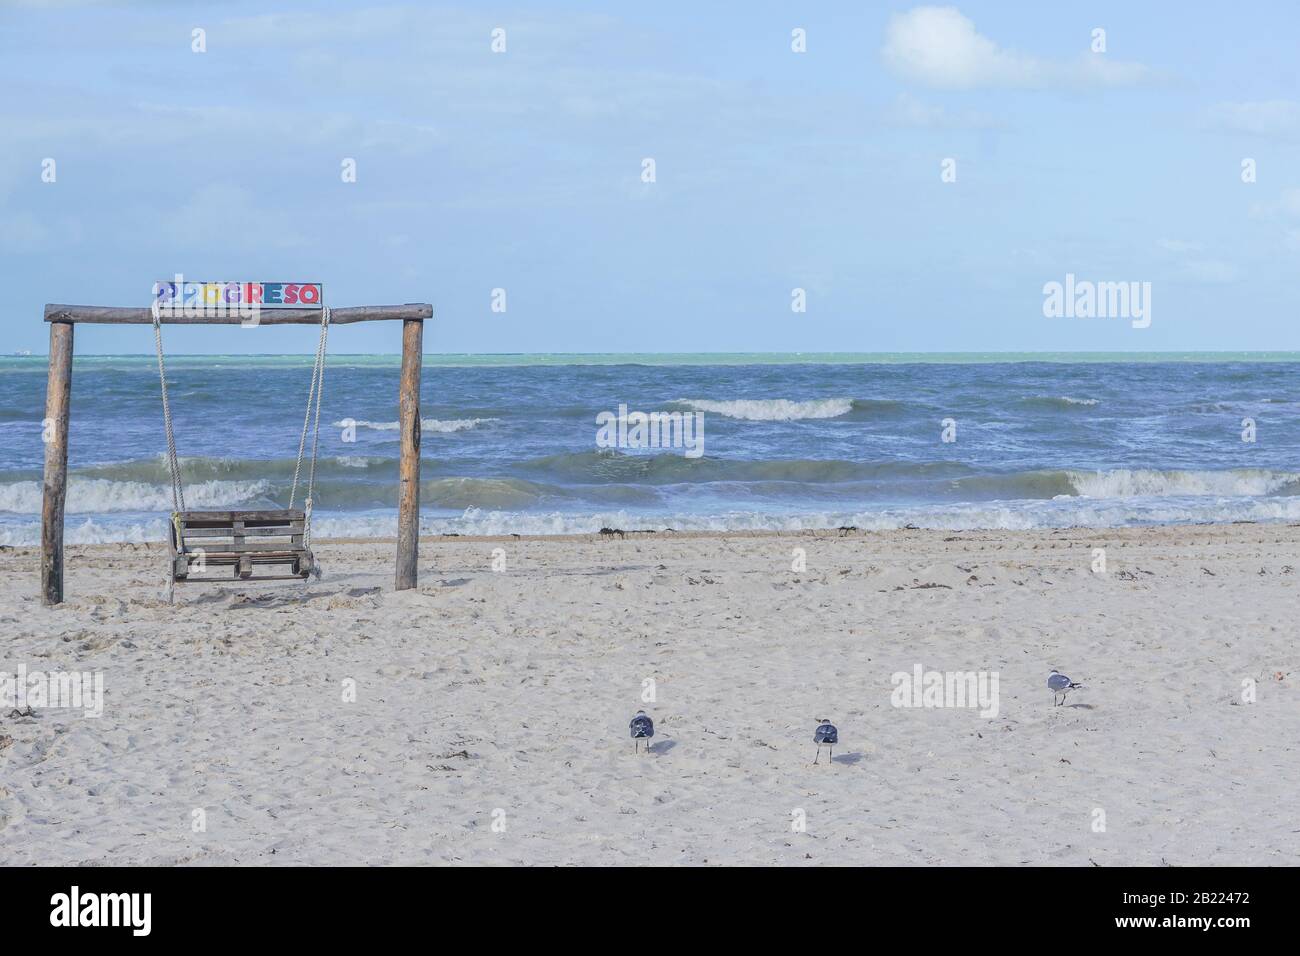 Progreso, Yucatan, Mexico: An empty wooden swing with 'PROGRESO' written in colorful letters, on a beach on the Gulf of Mexico. Stock Photo